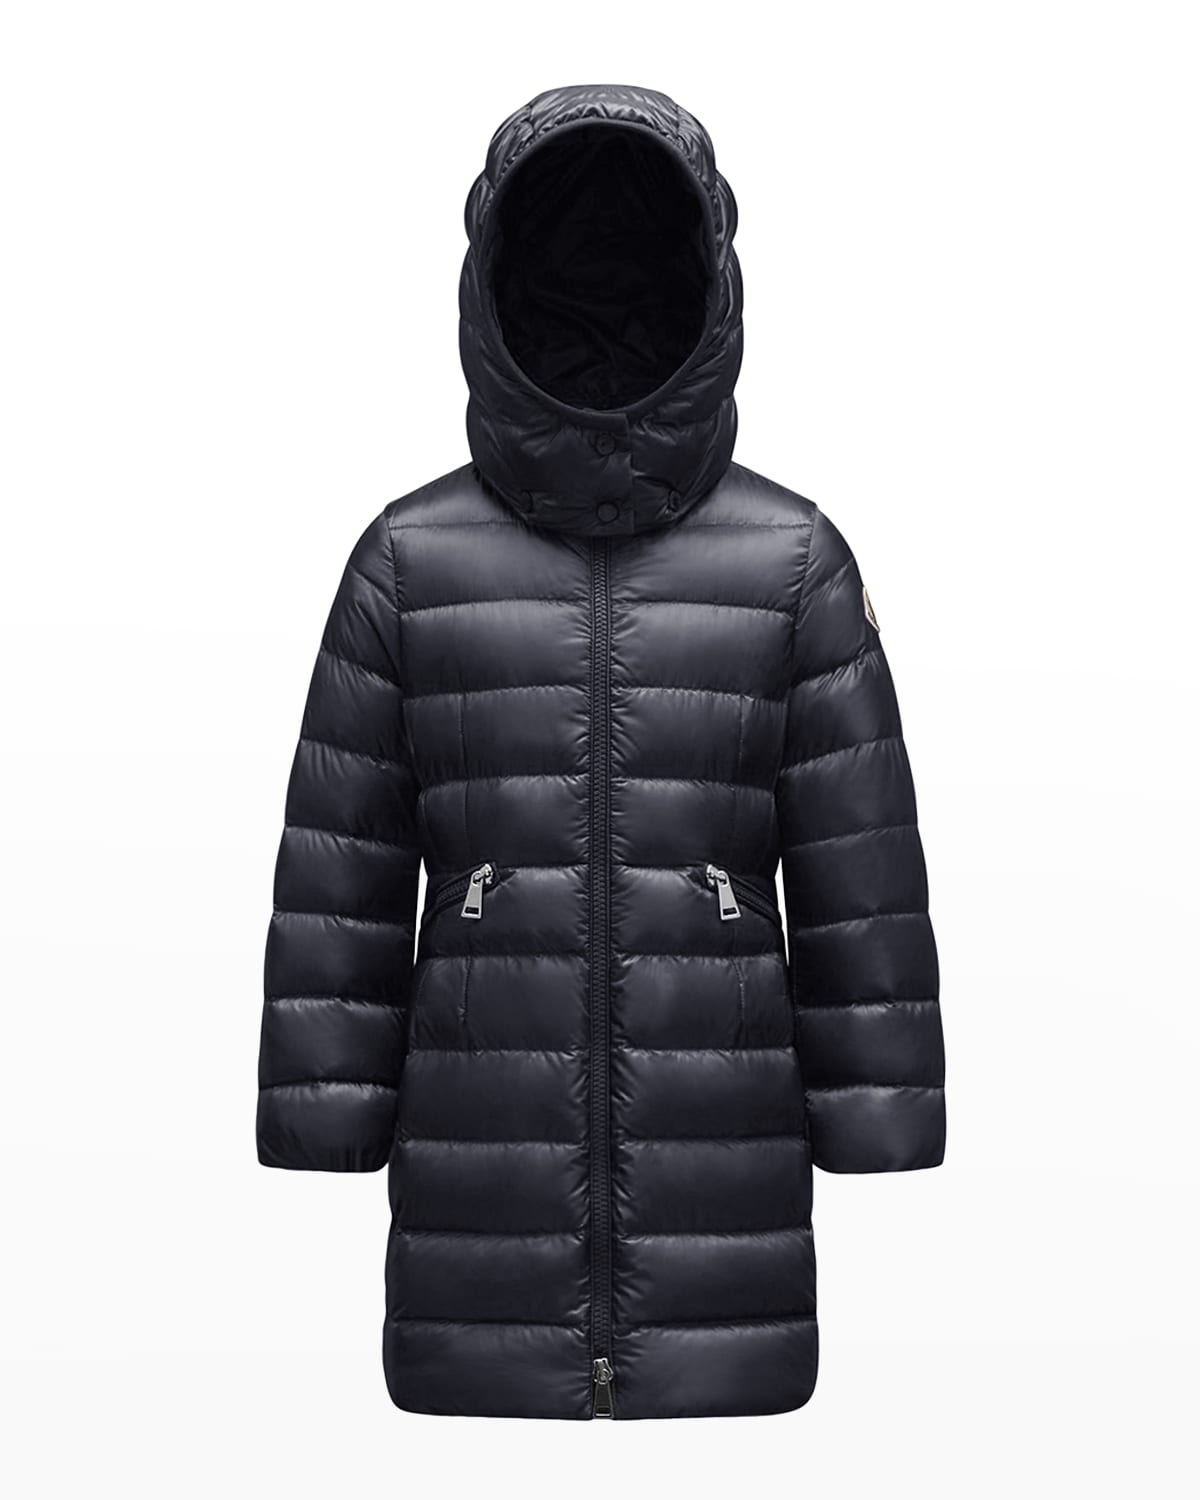 OCHENTA Big Boys Mid-Long Winter Padded Jacket Quilted Coat Age of 4-12 